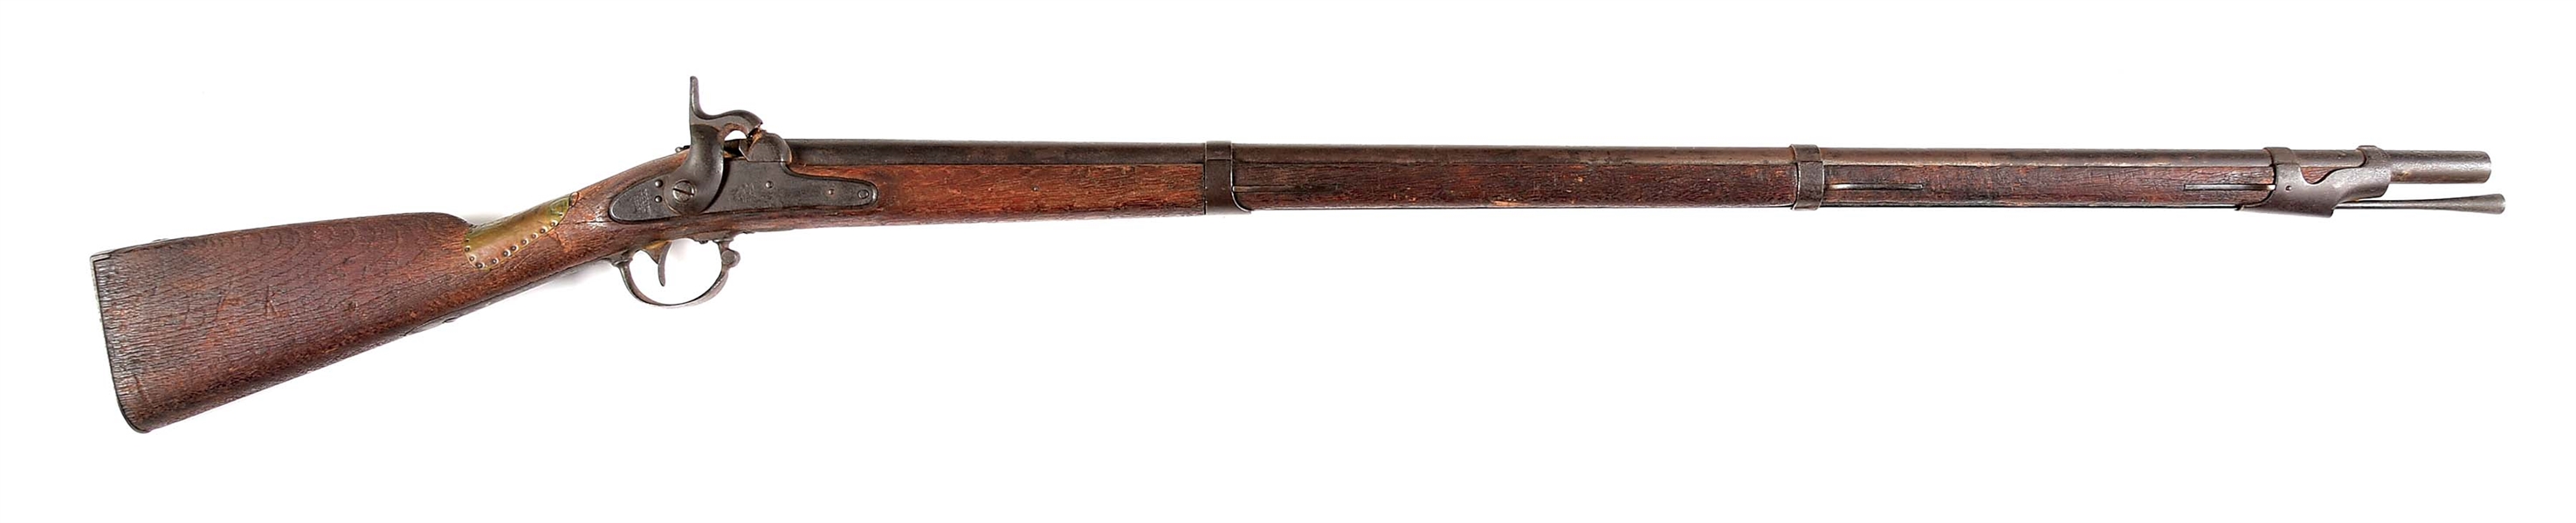 (A) MODEL 1842 SPRINGFIELD PERCUSSION MUSKET FROM BATTLE OF SOUTH MOUNTAIN.